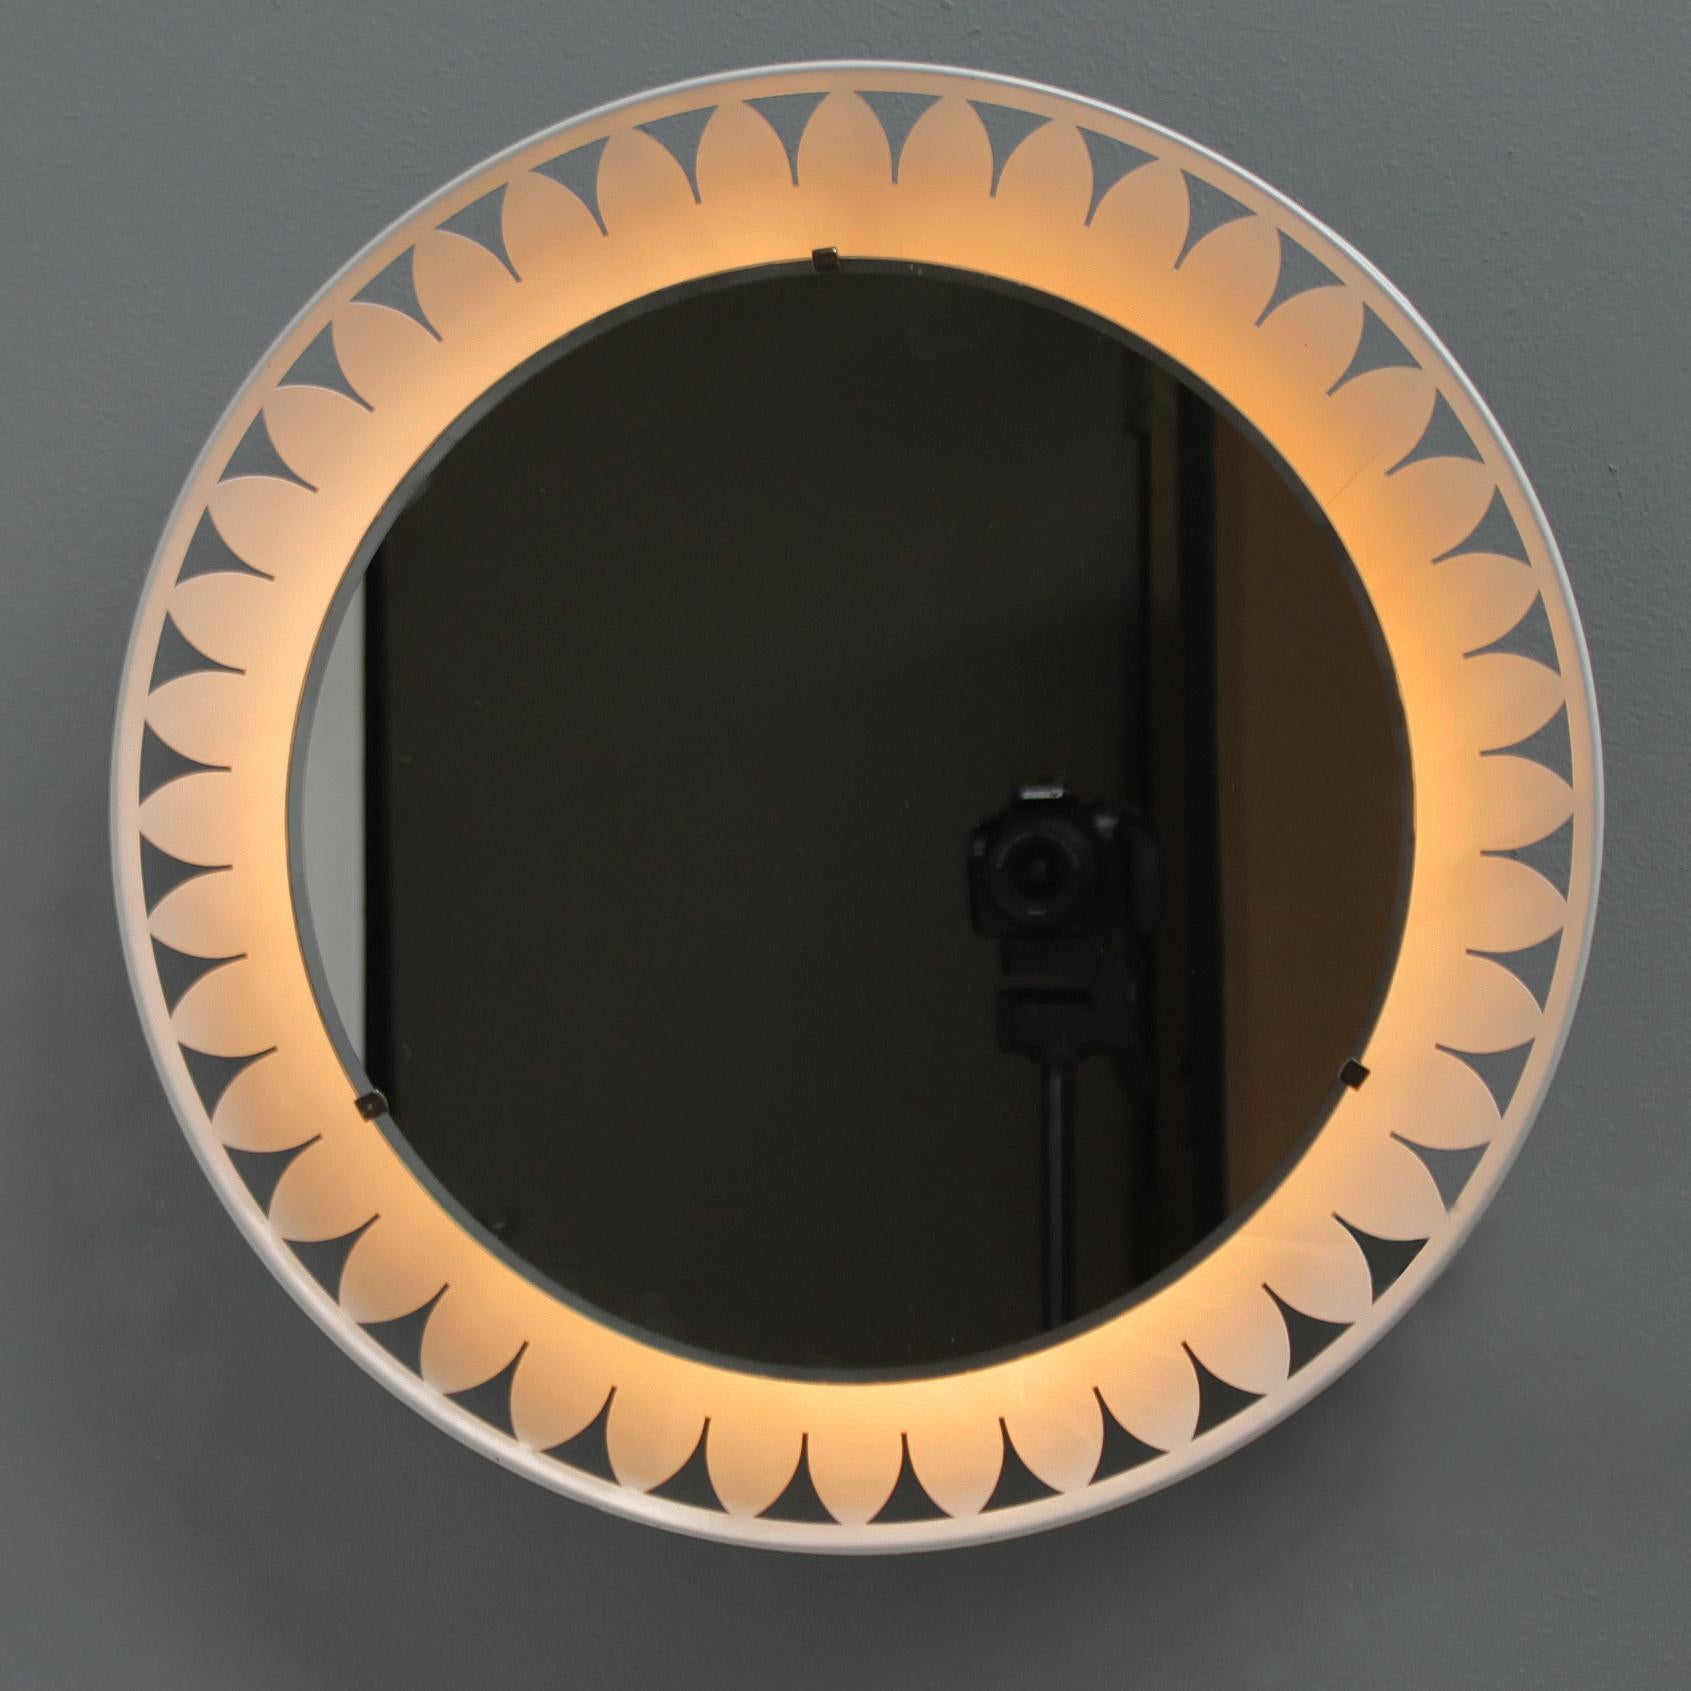 Mid-Century Modern Flower-Shaped Illuminated Mirror by Ernest Igl for Hillebrand For Sale